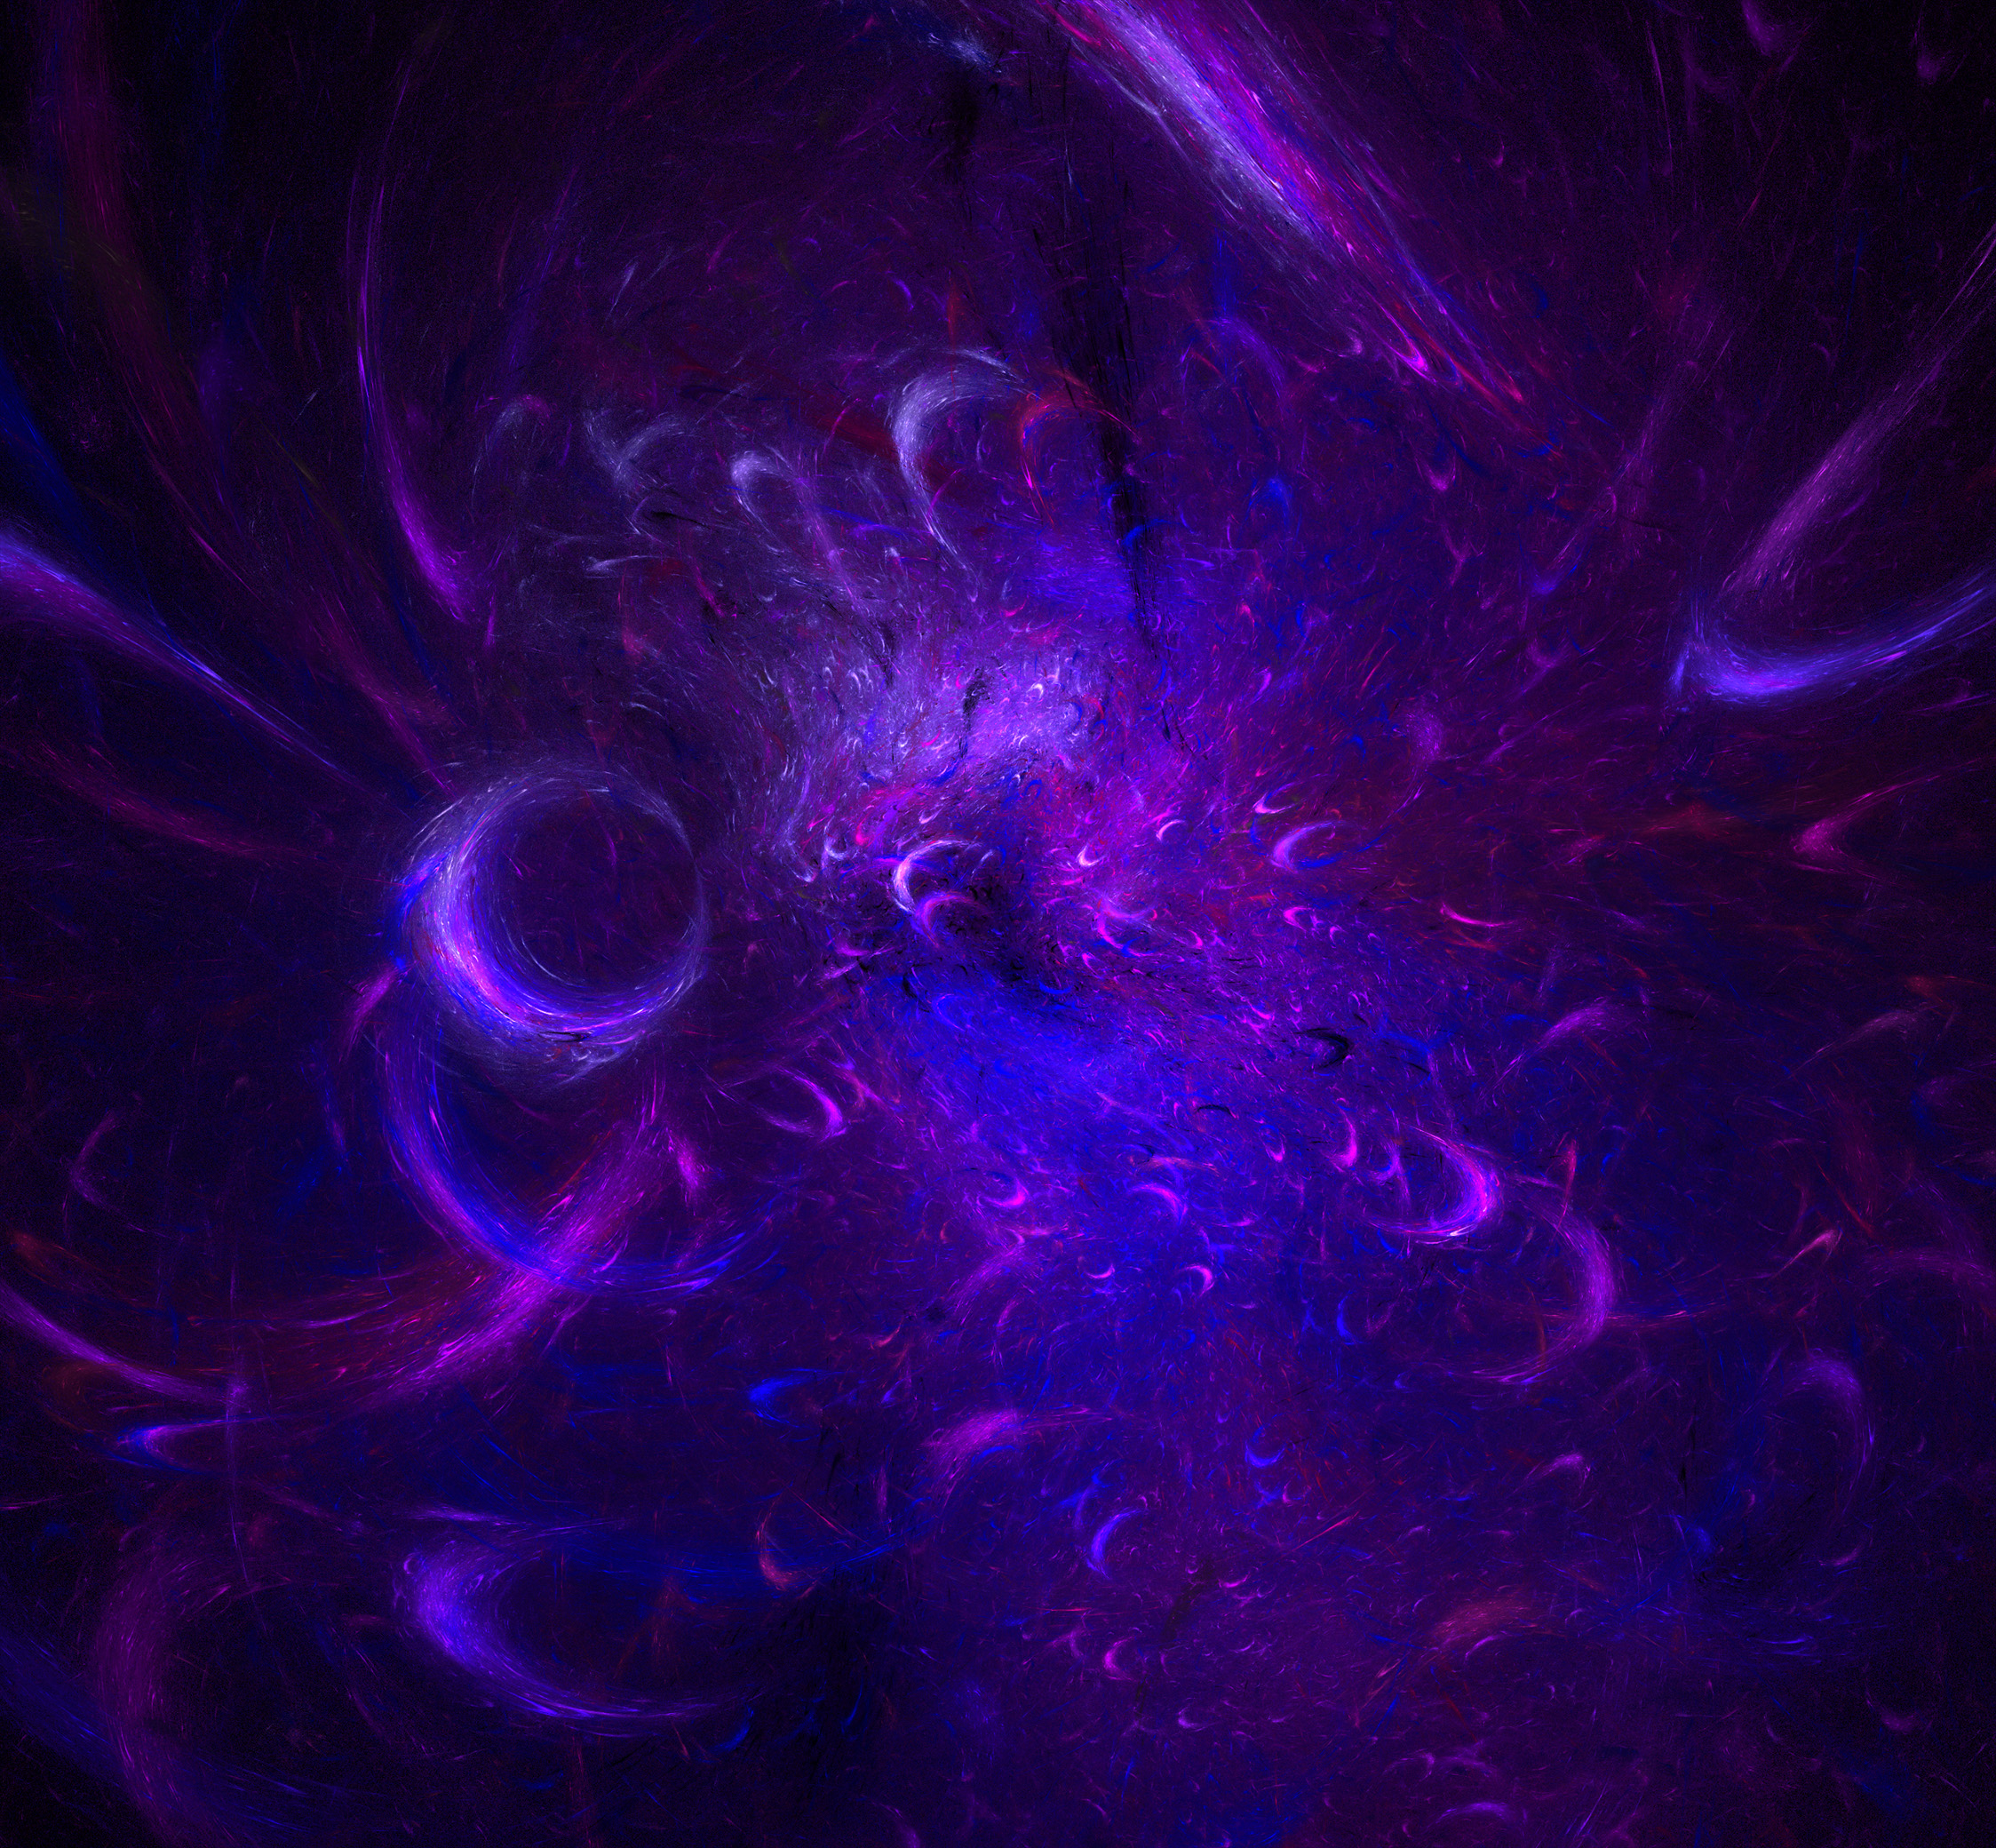 purple, abstract, violet, shine, brilliance, fractal, stains, spots 1080p